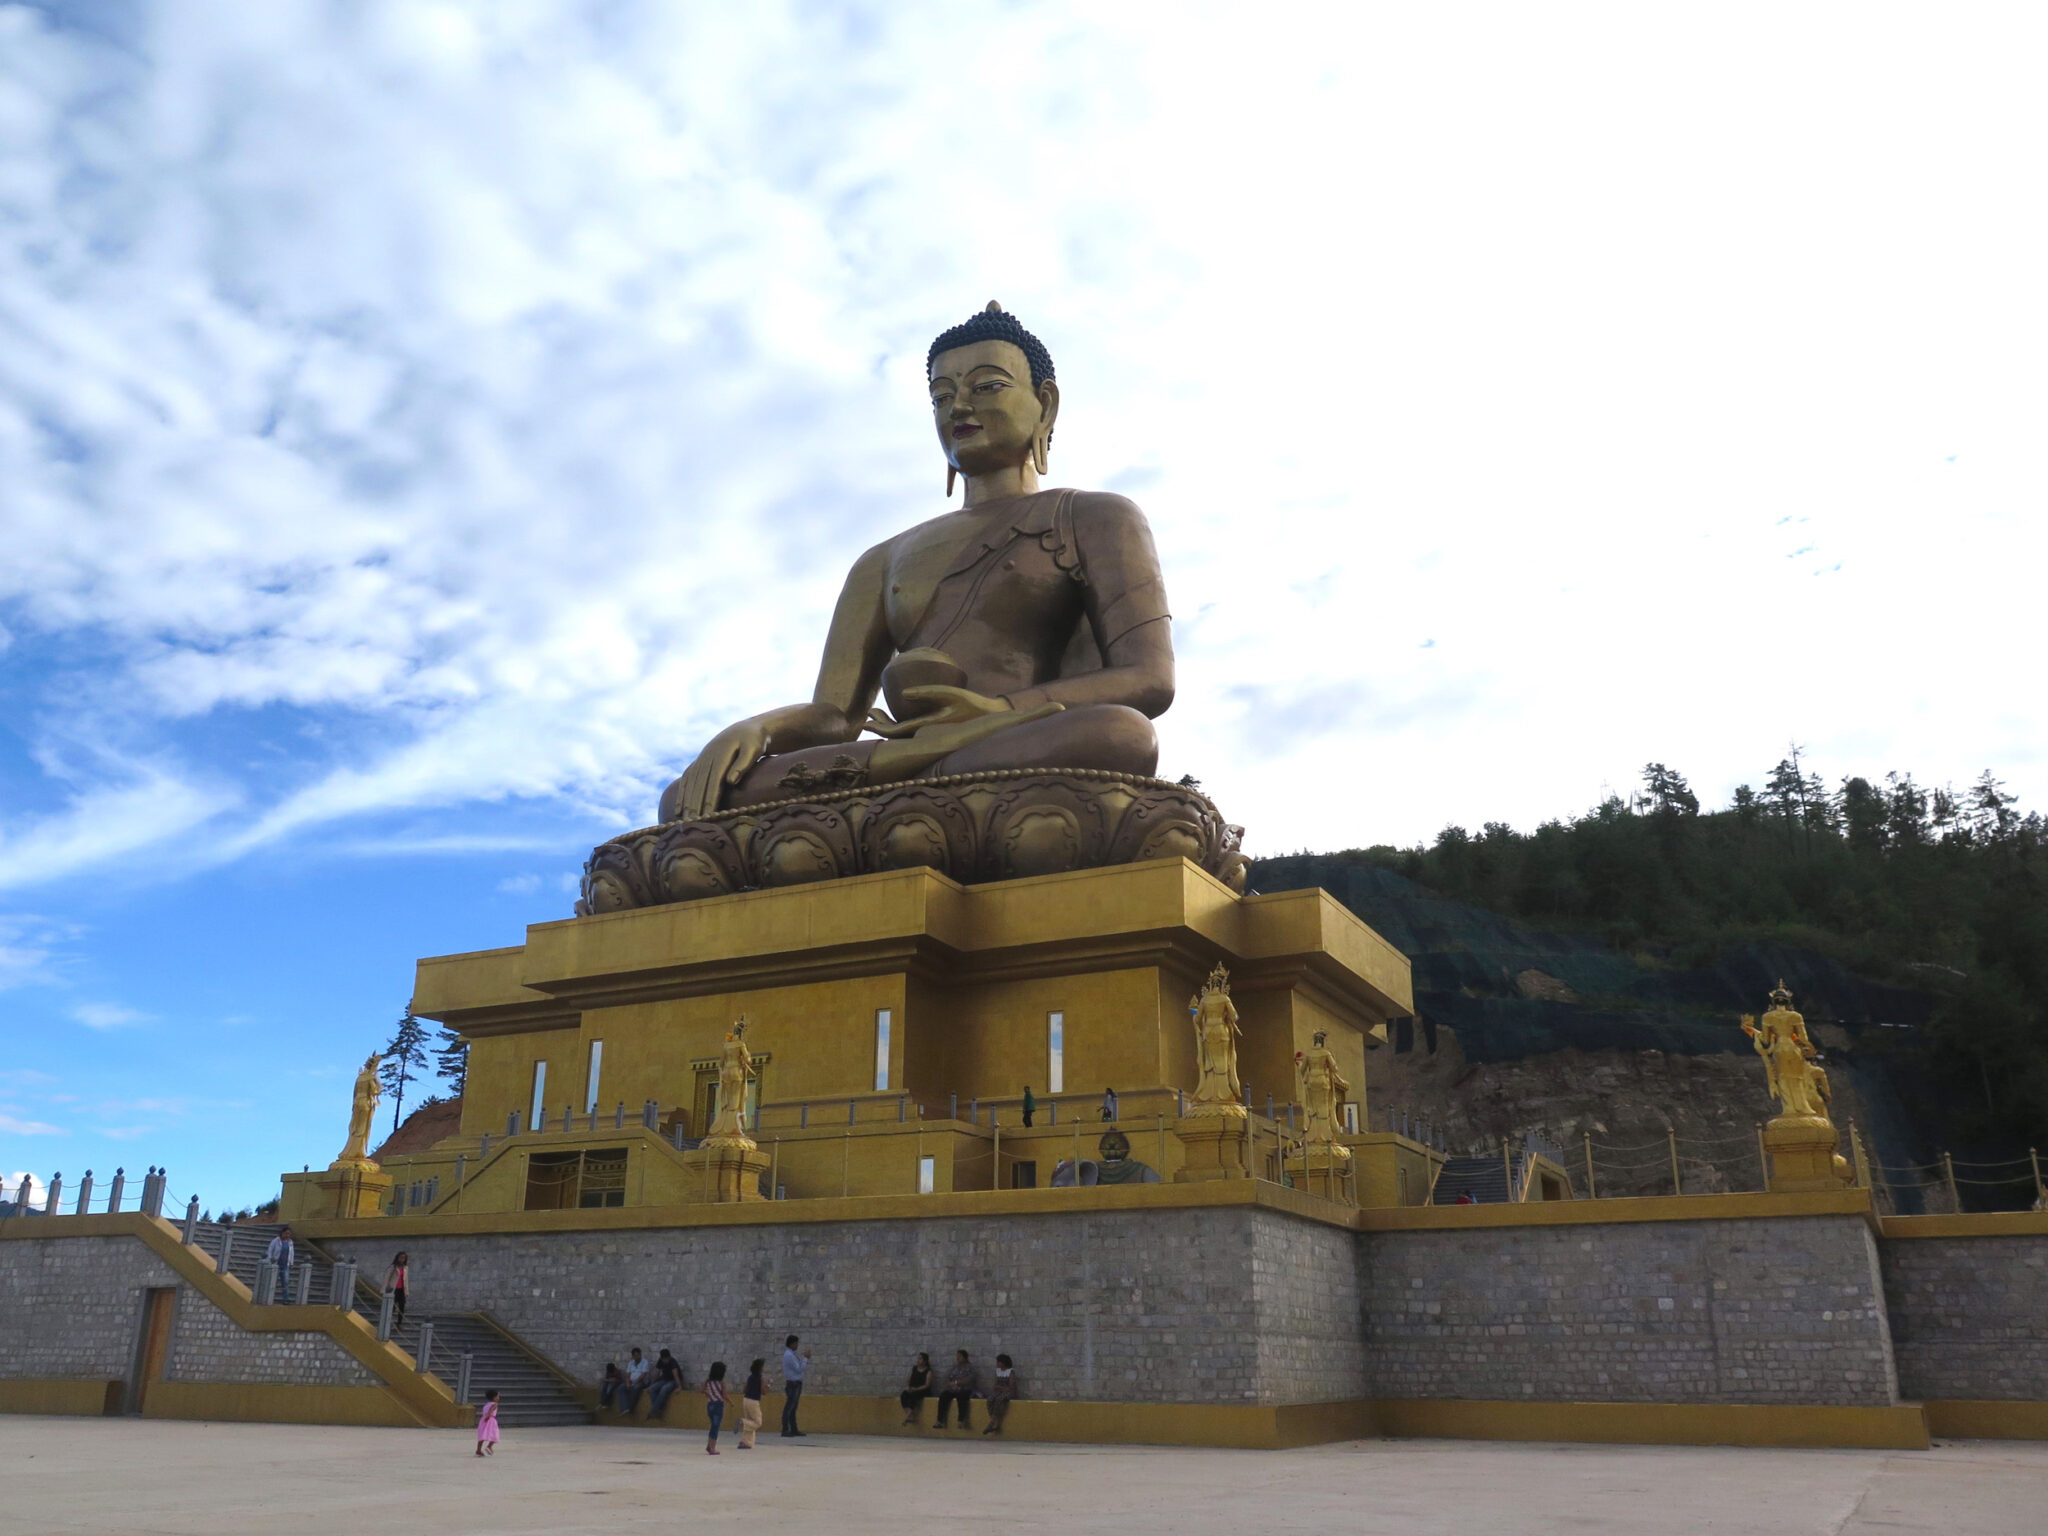 Colossal golden Buddha statue seated atop golden plinth, surrounded by terrace decorated with deity statues